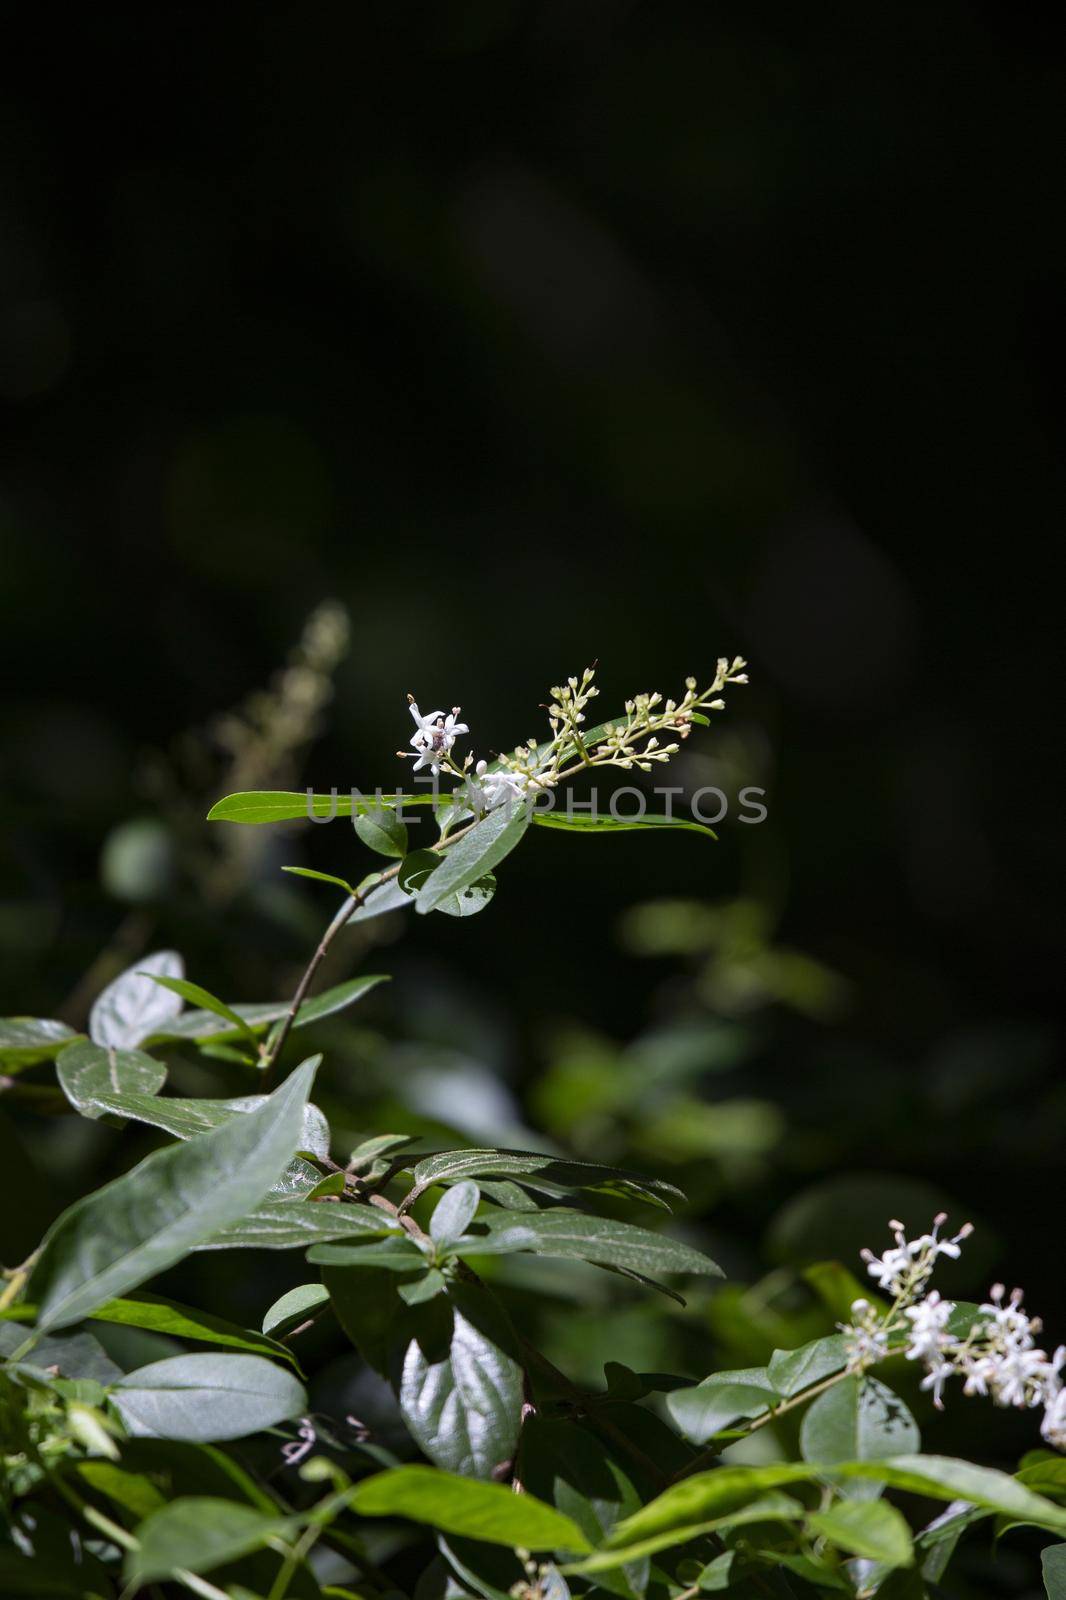 Tiny white blooms flowering on a green plant